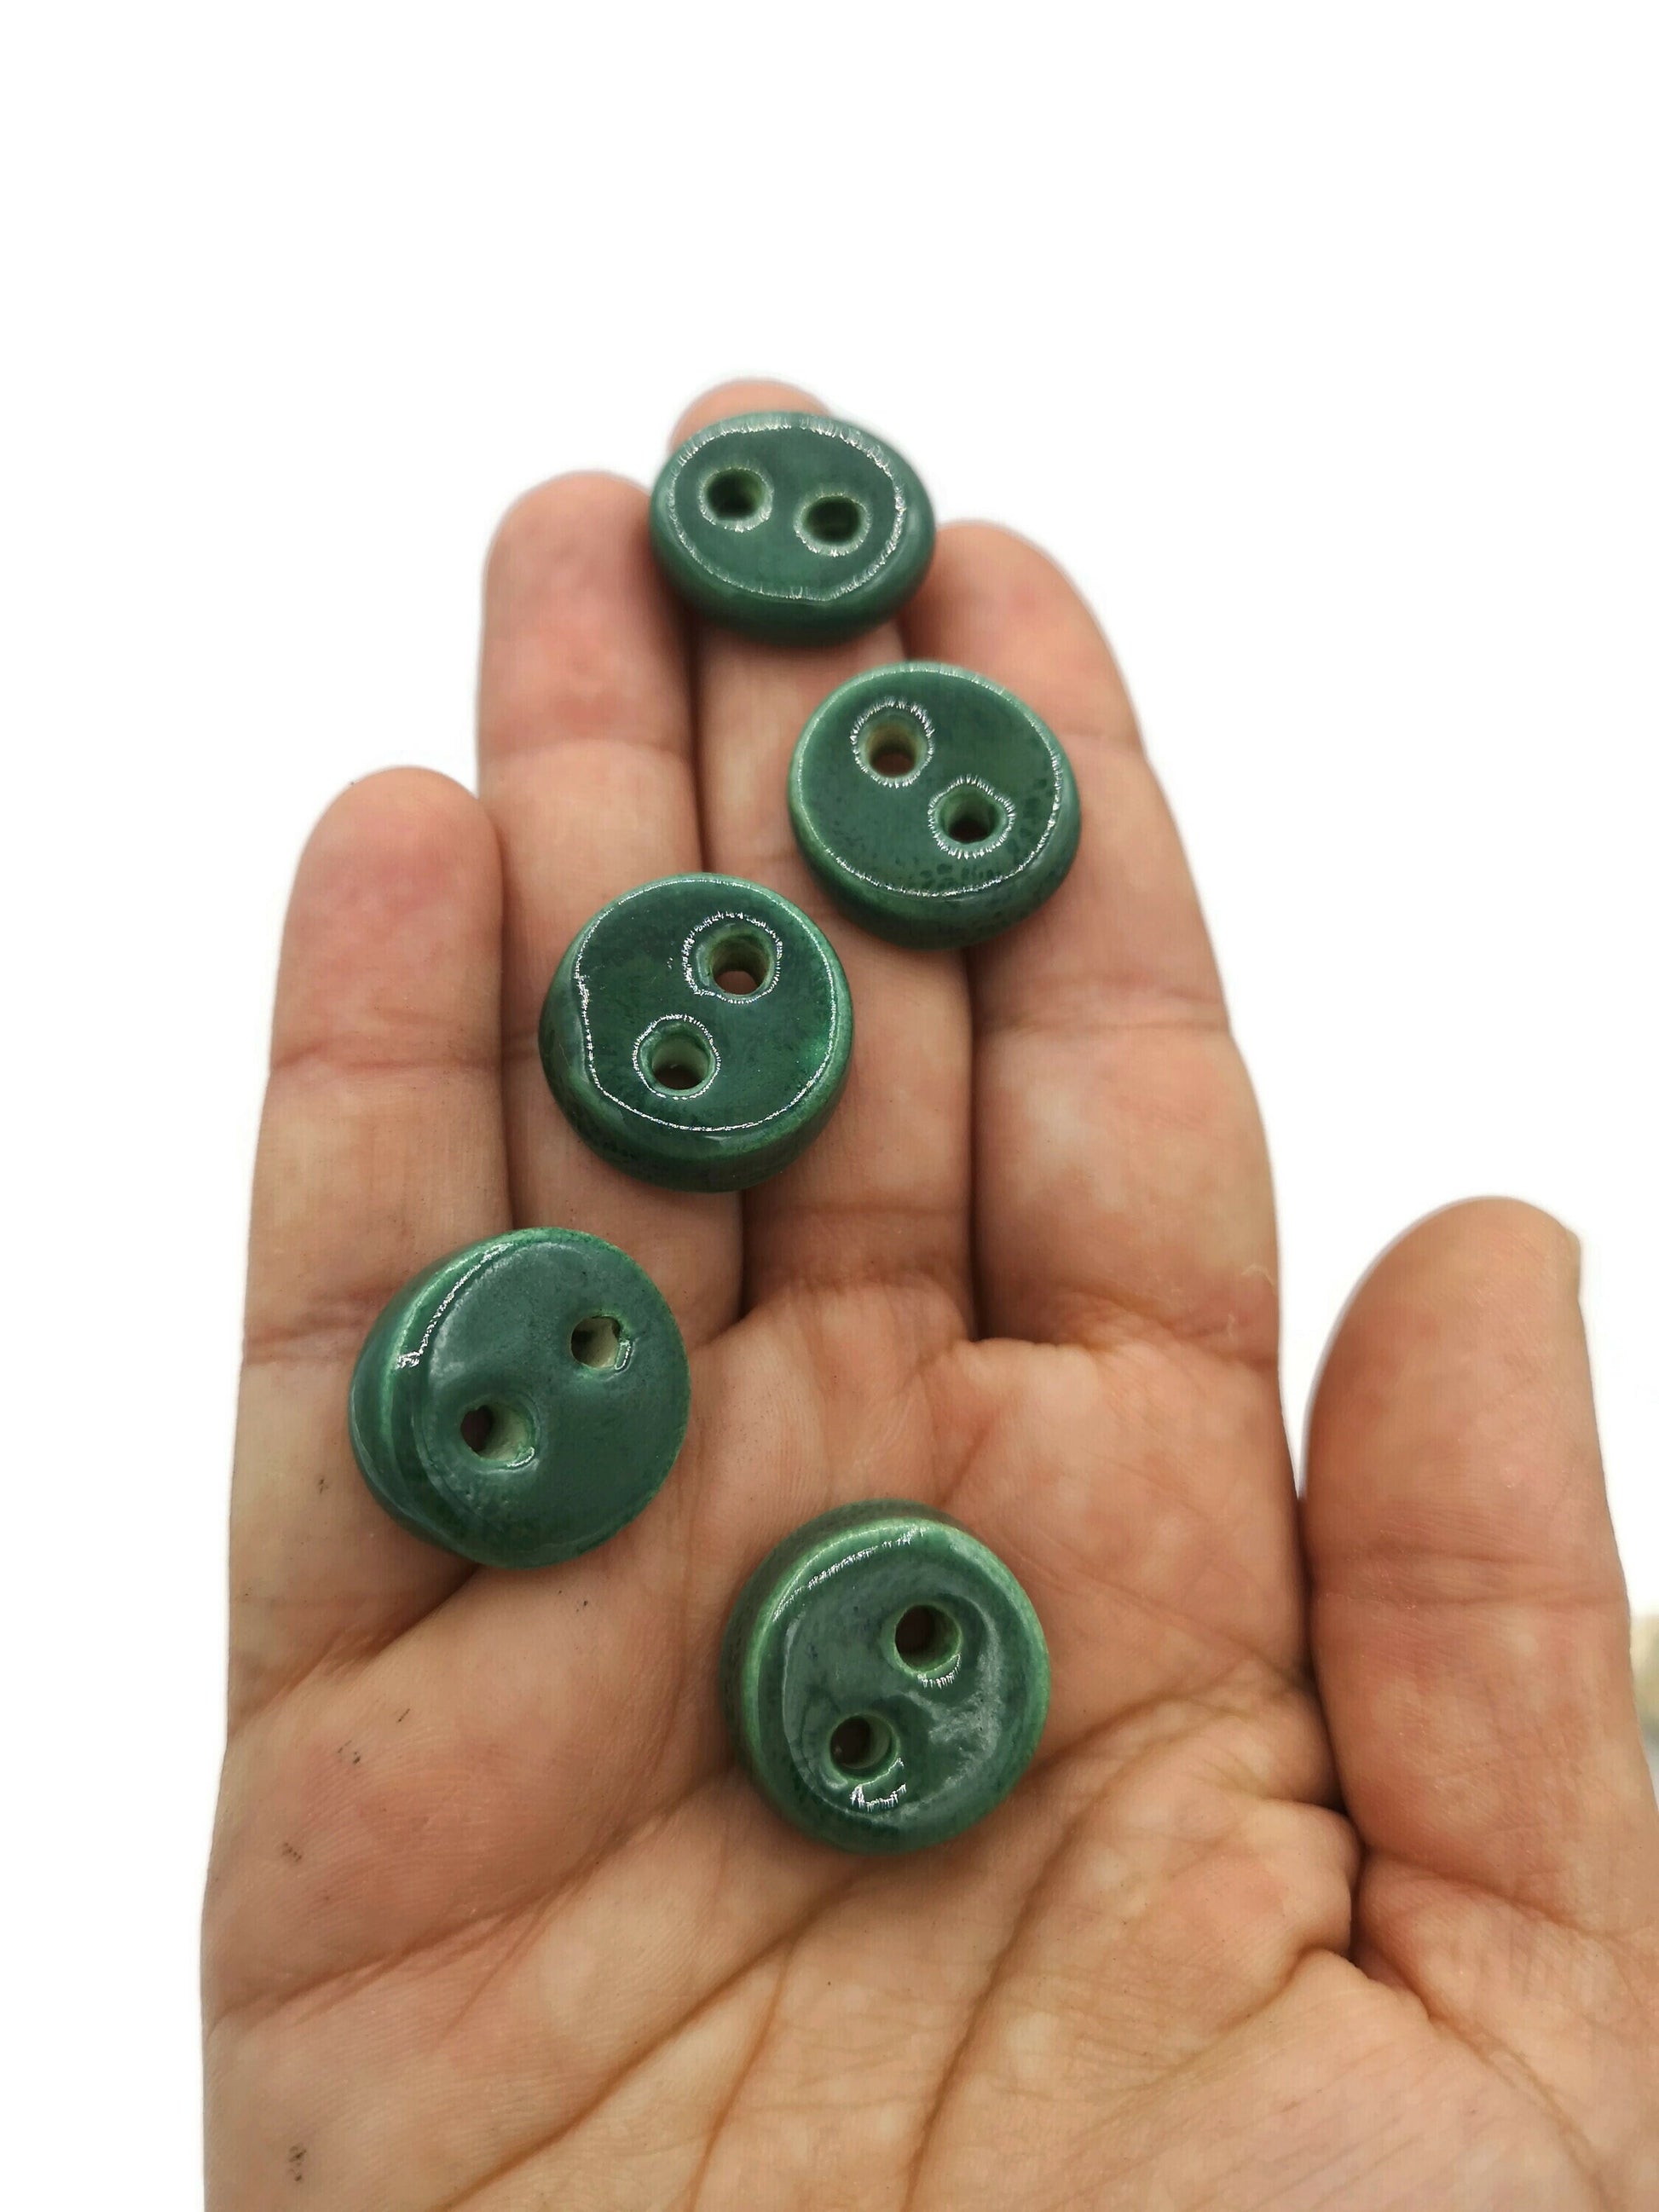 Coat Buttons, 5 Pcs Sewing Buttons Antique Look, Handmade Ceramic Beads For Jewelry Making, Sewing Supplies And Notions, Best Gifts For Her - Ceramica Ana Rafael